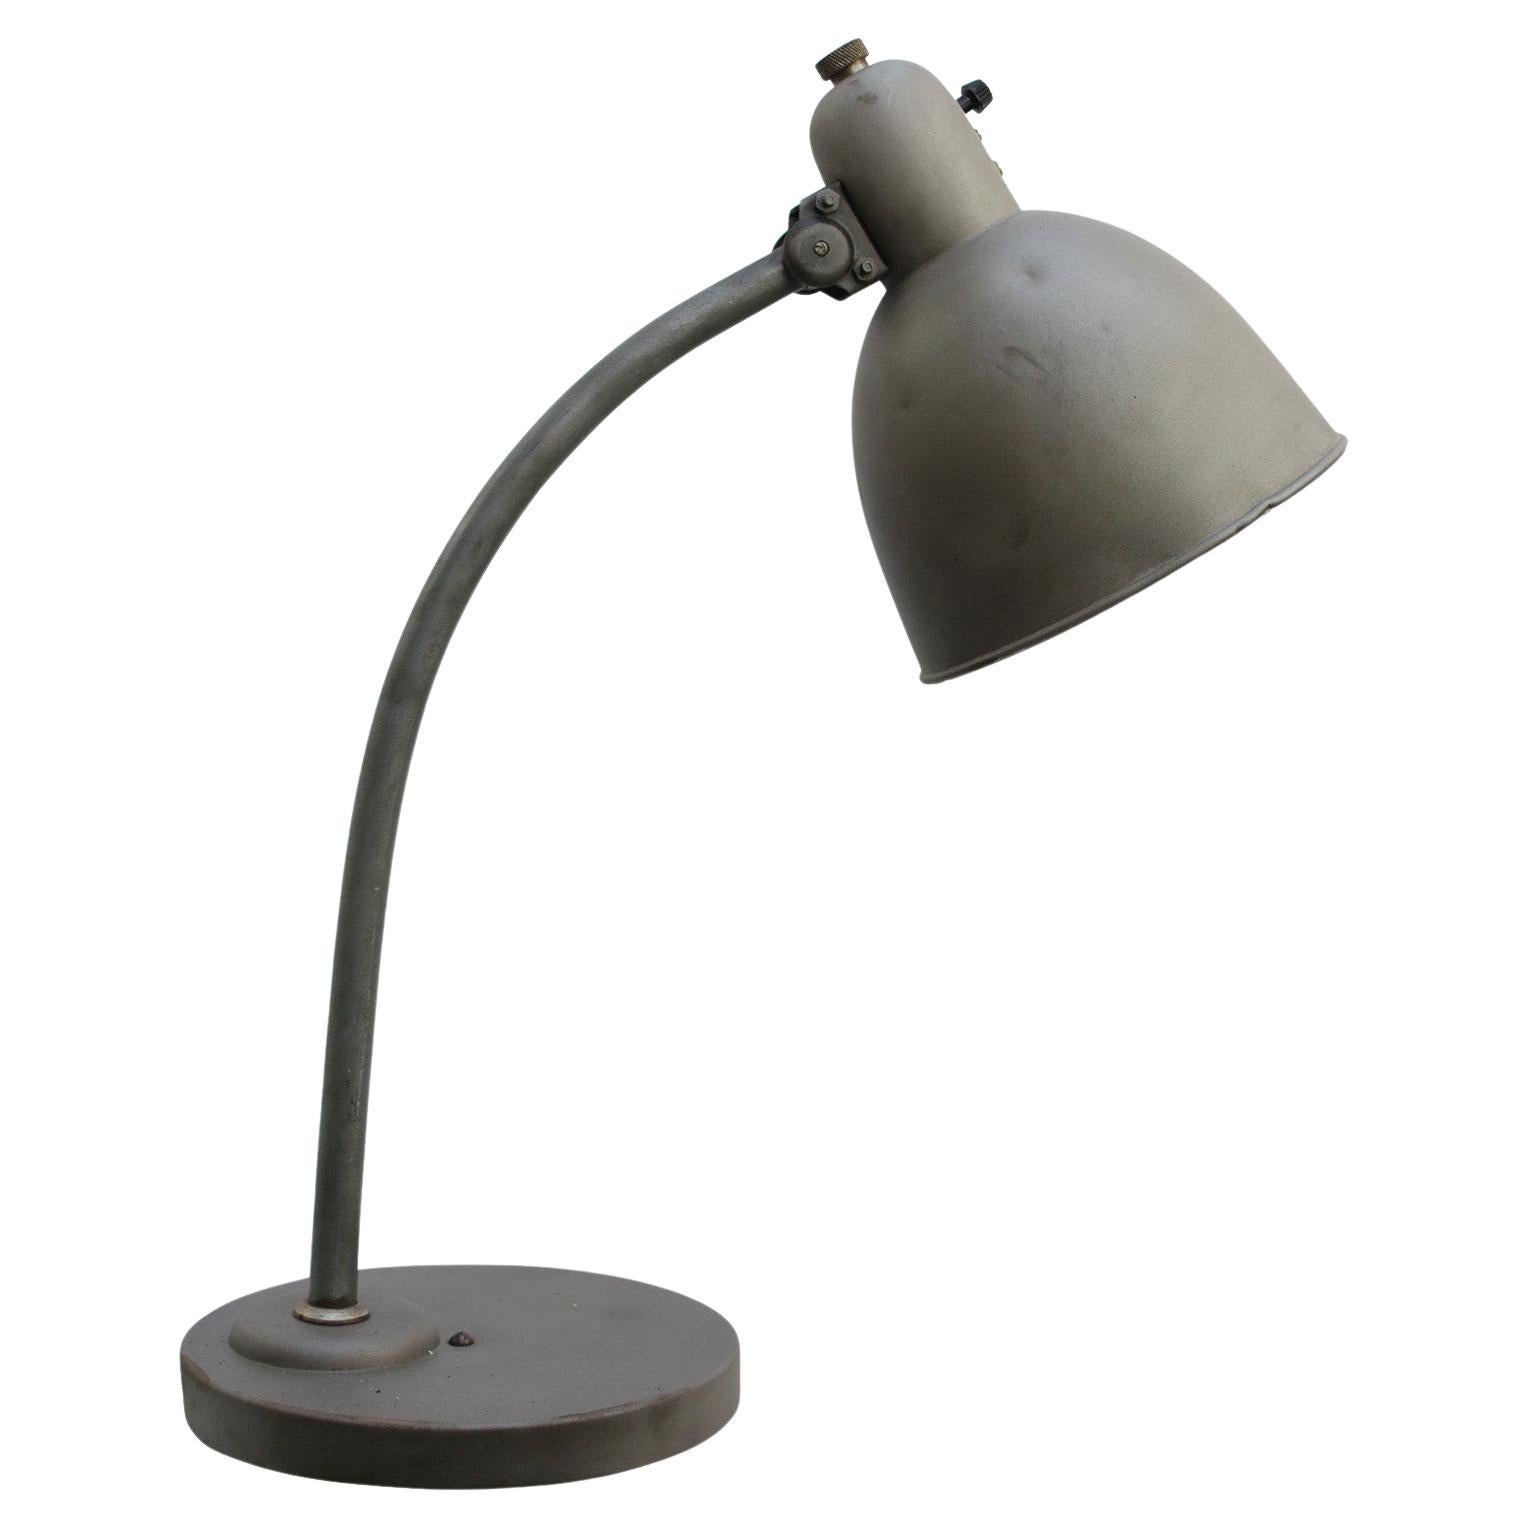 Grey metal desk light
2.5 meter black cotton flex, plug and switch in shade

Also available with US/UK plug

Weight: 1.90 kg / 4.2 lb

Priced per individual item. All lamps have been made suitable by international standards for incandescent light